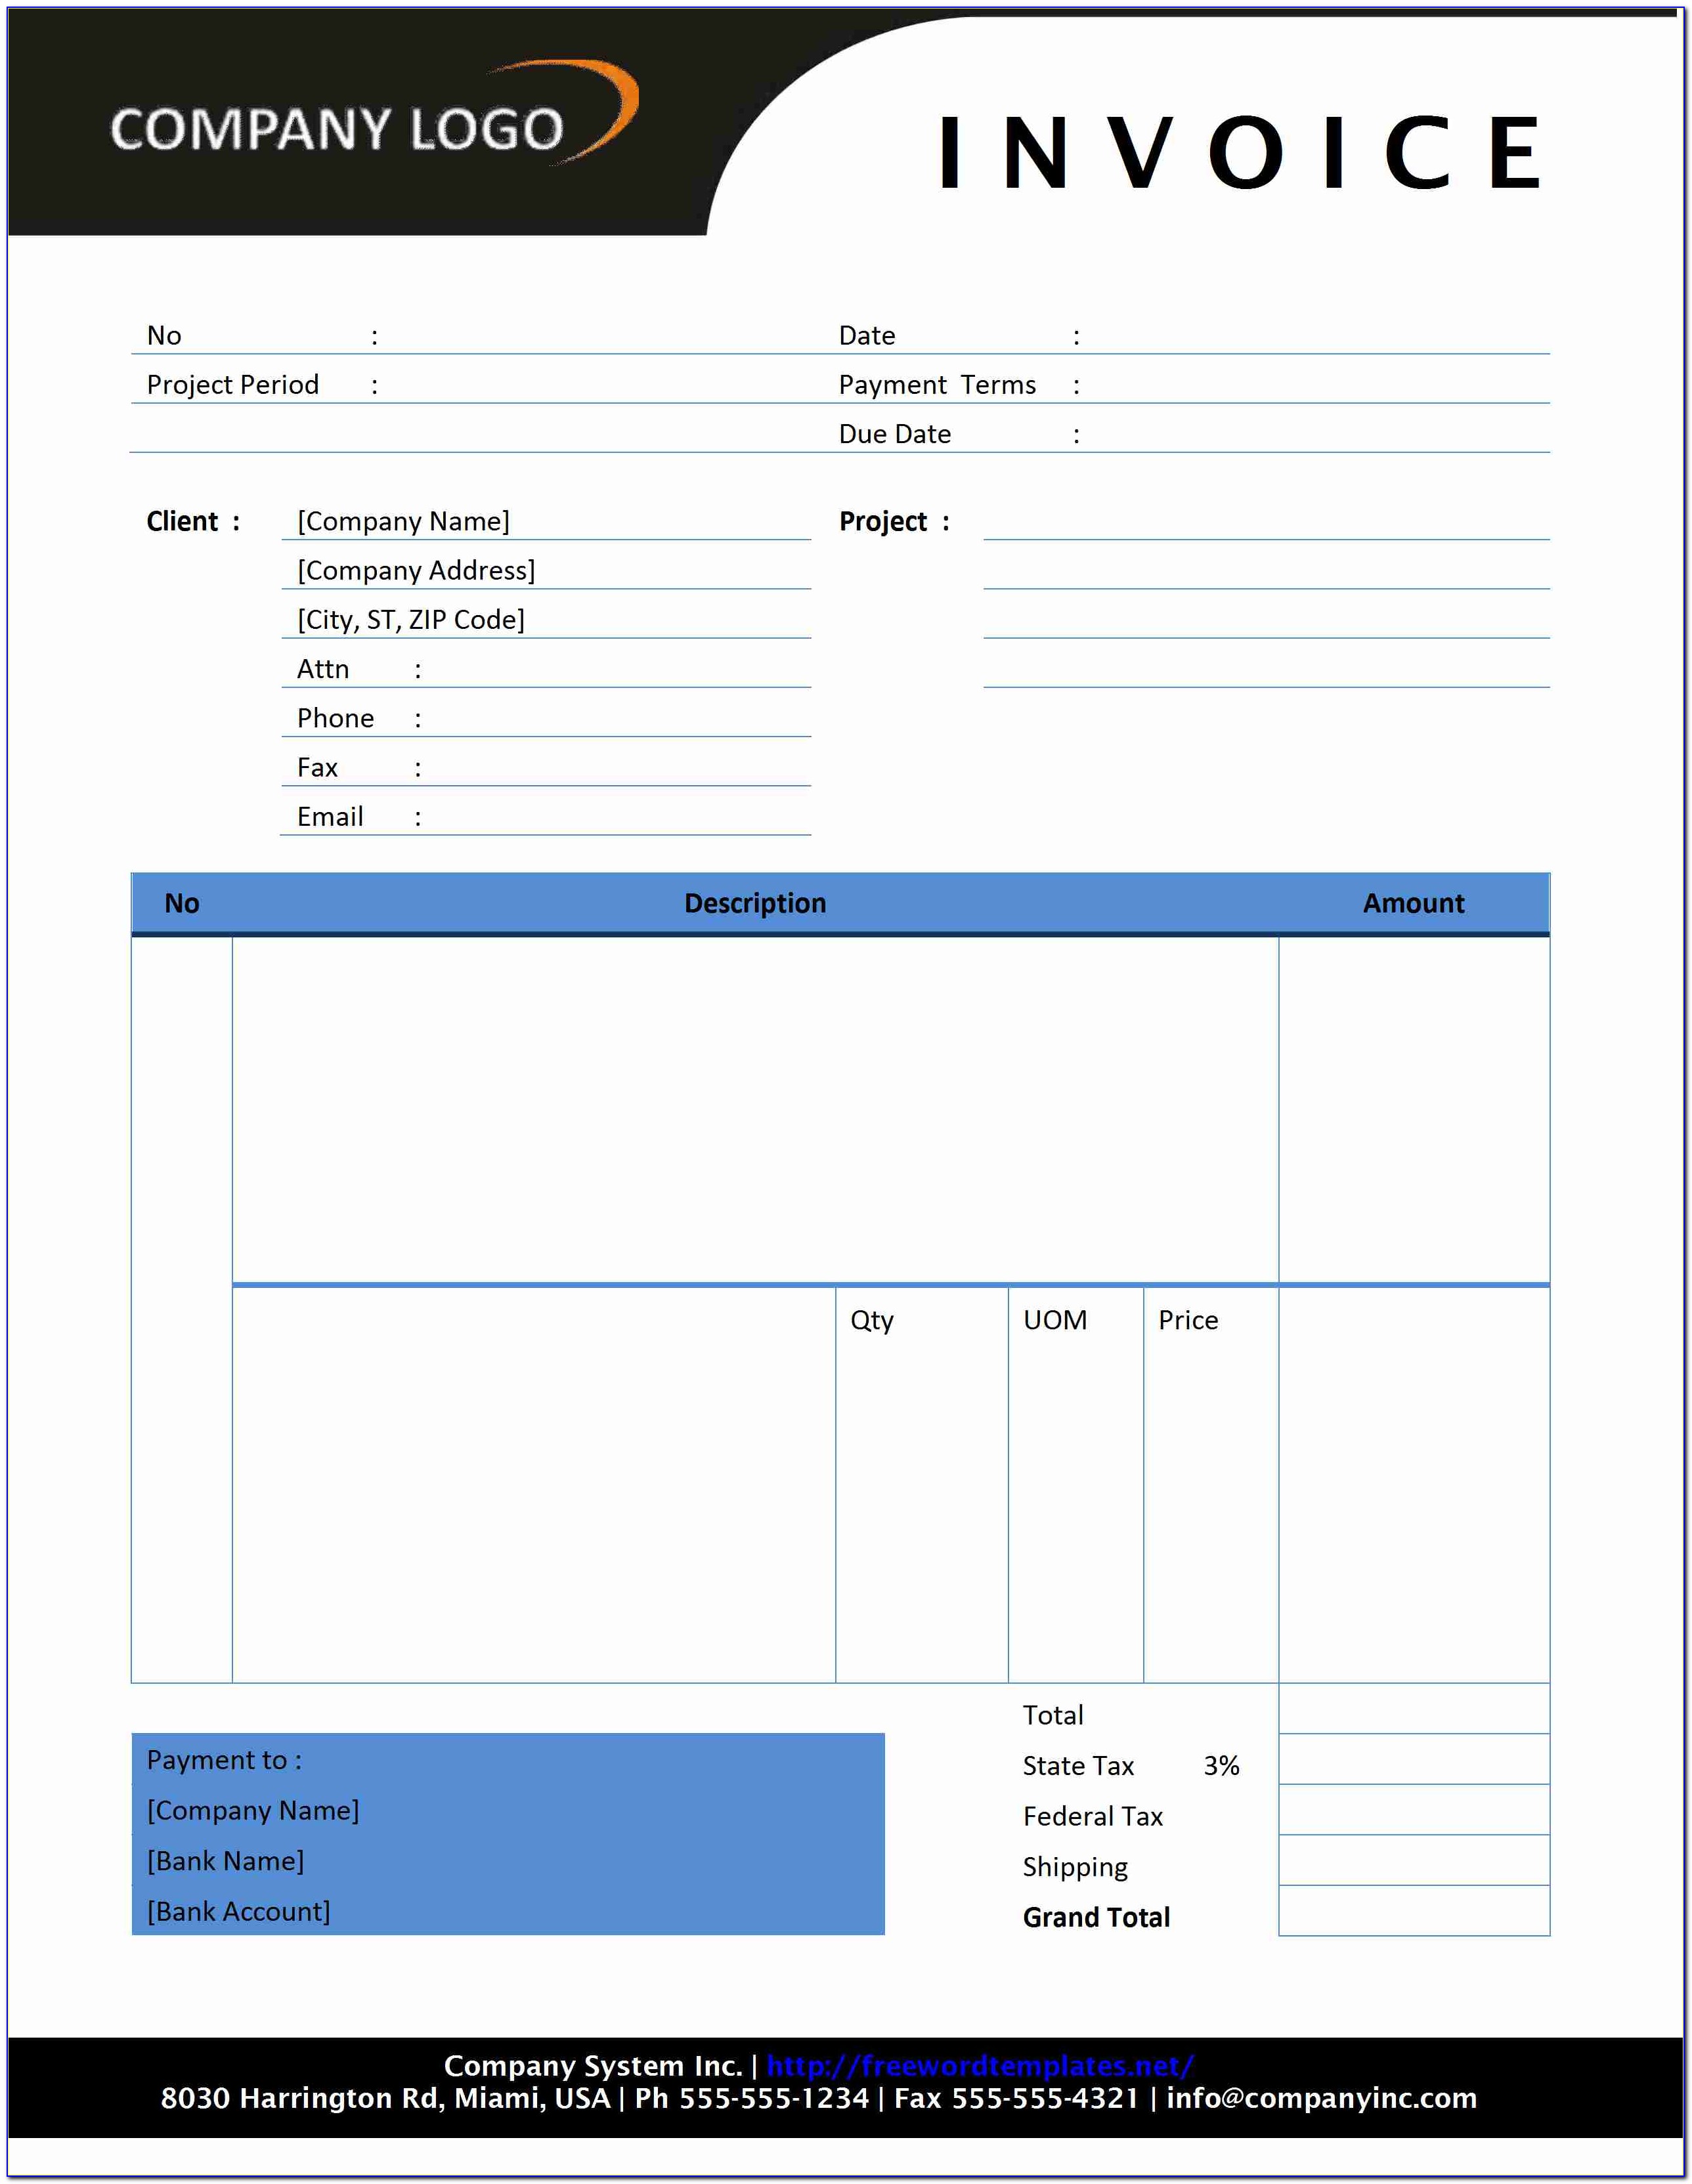 Example Invoice For Consulting Services